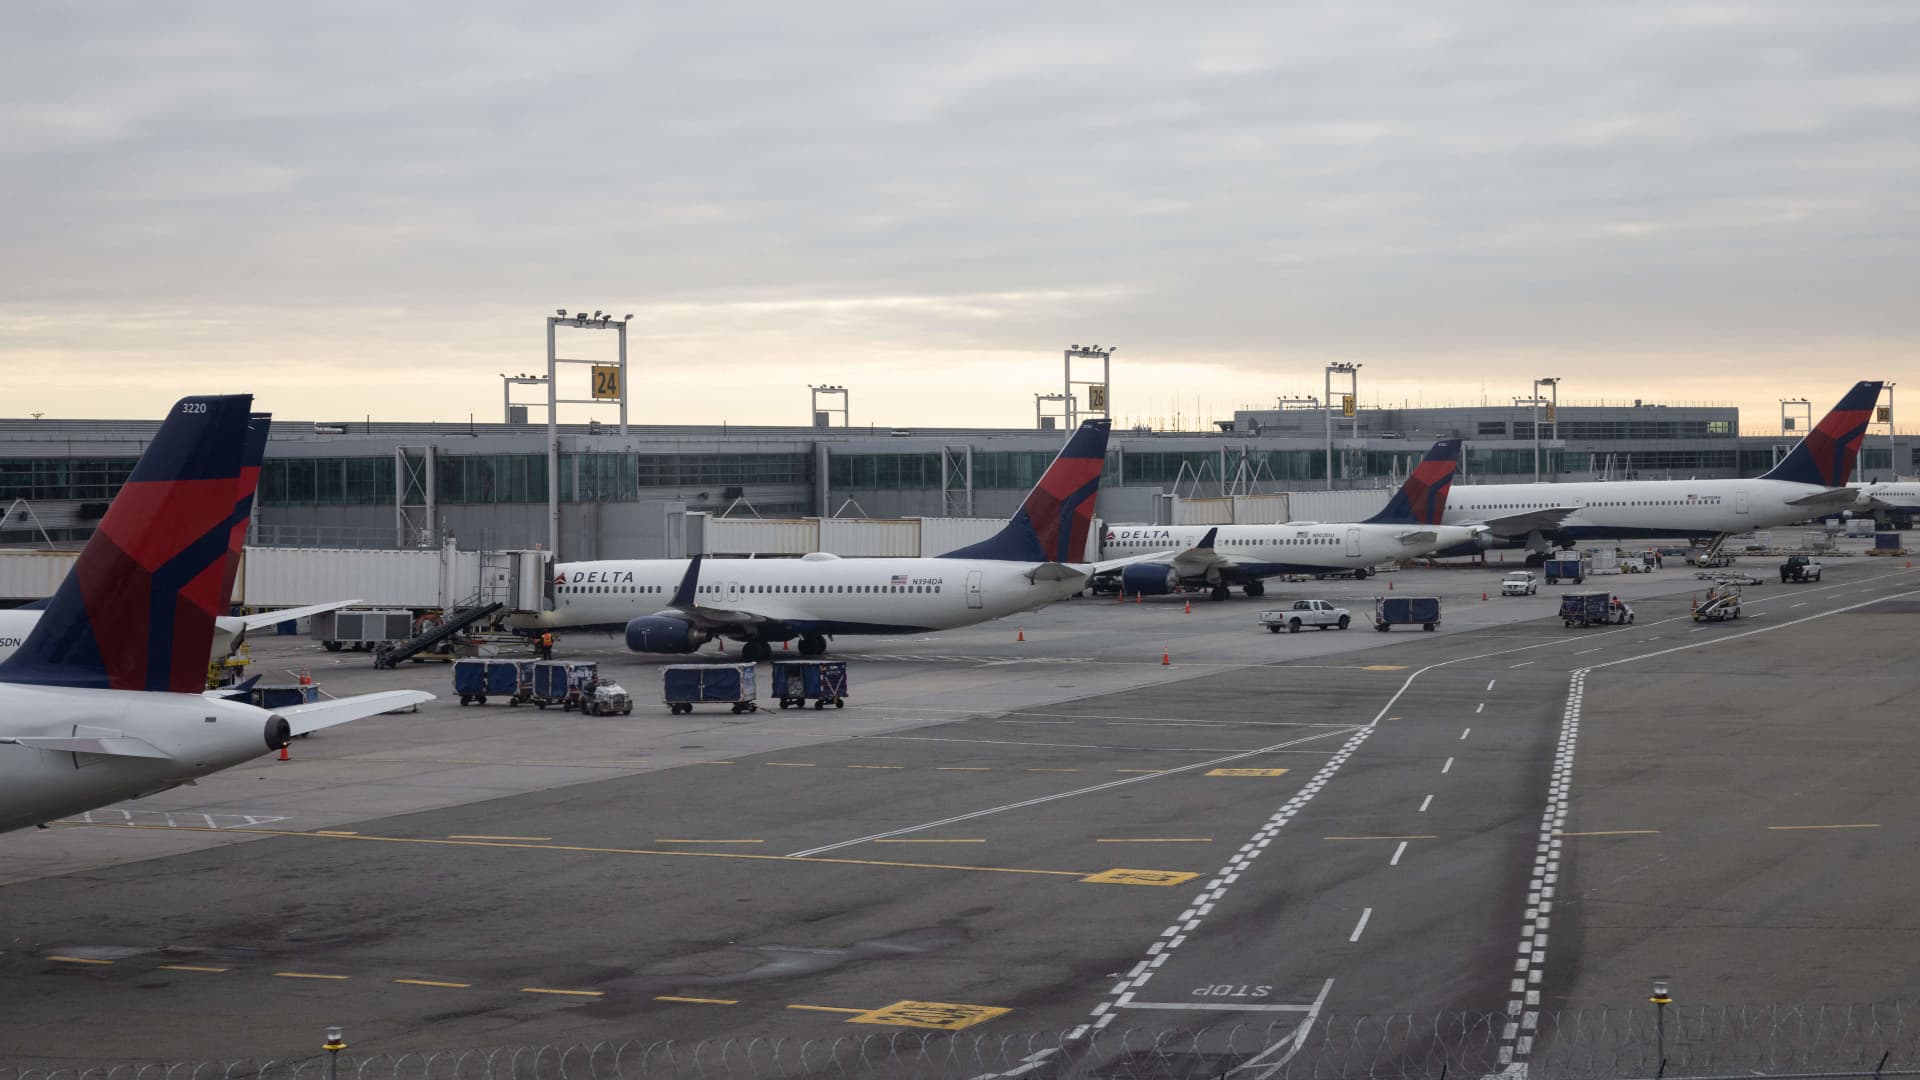 FAA launches investigation after two planes nearly collide at JFK airport – CNBC